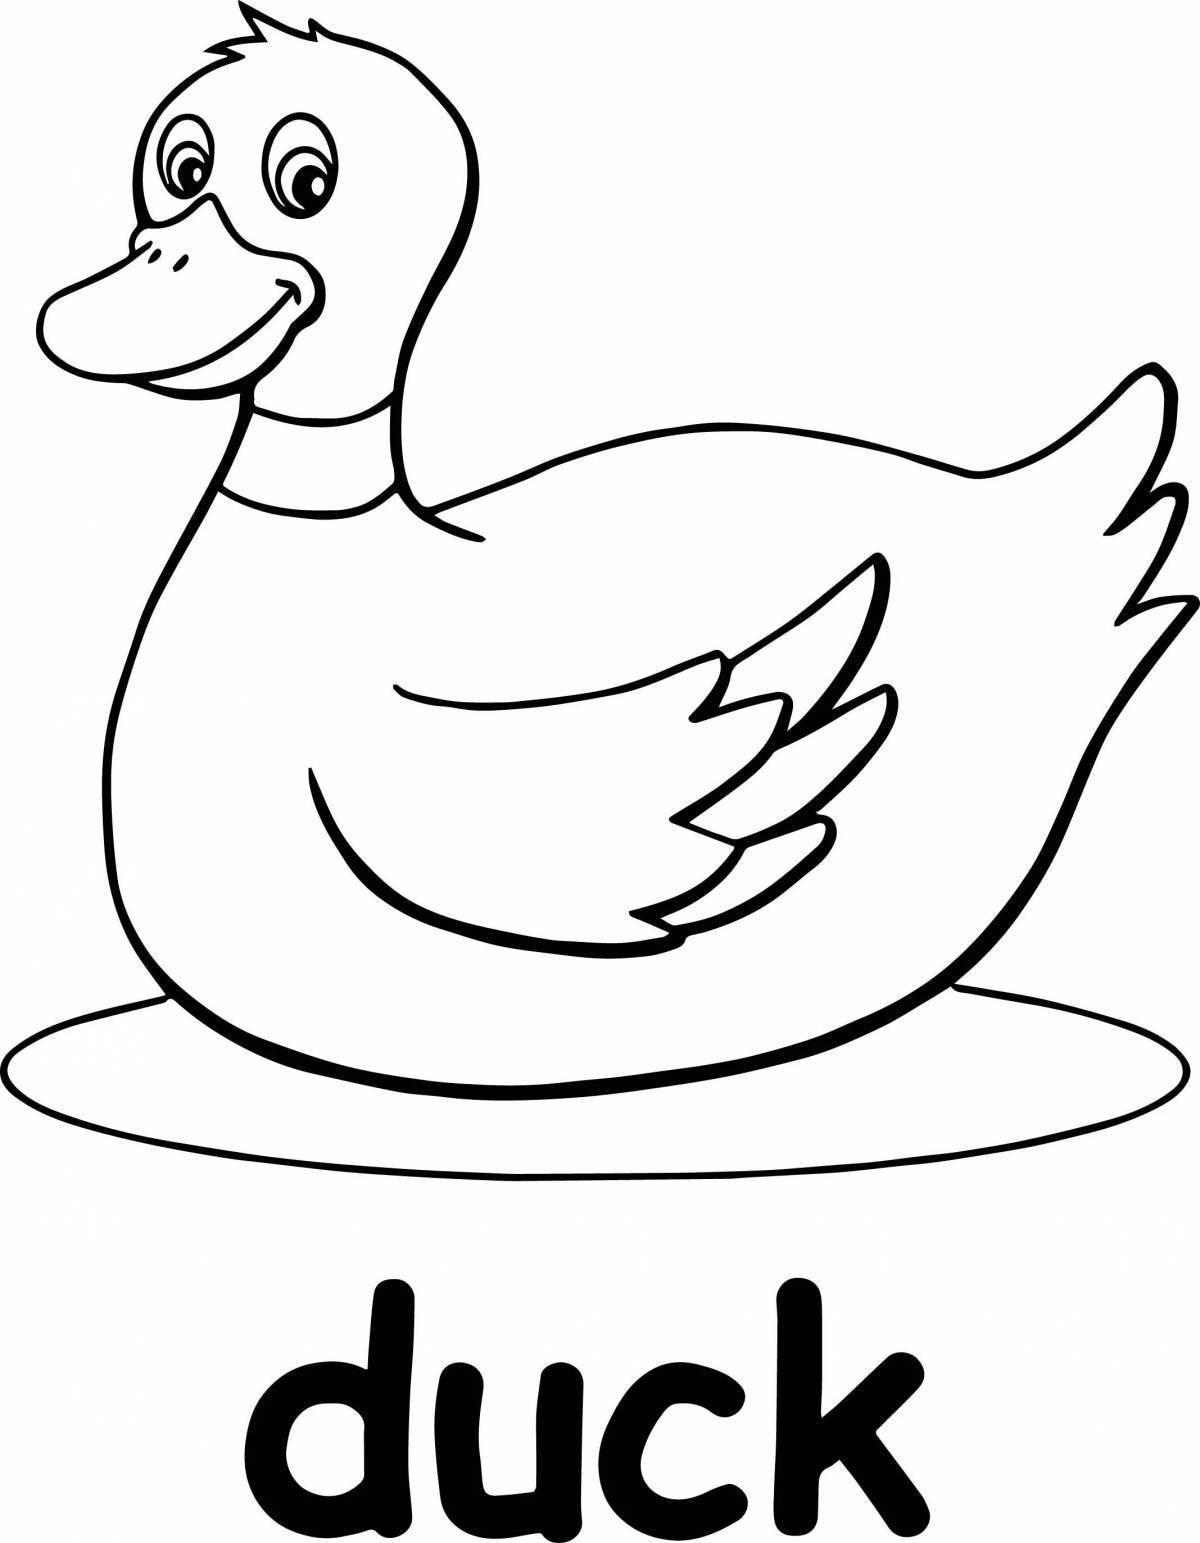 Magic duck coloring page